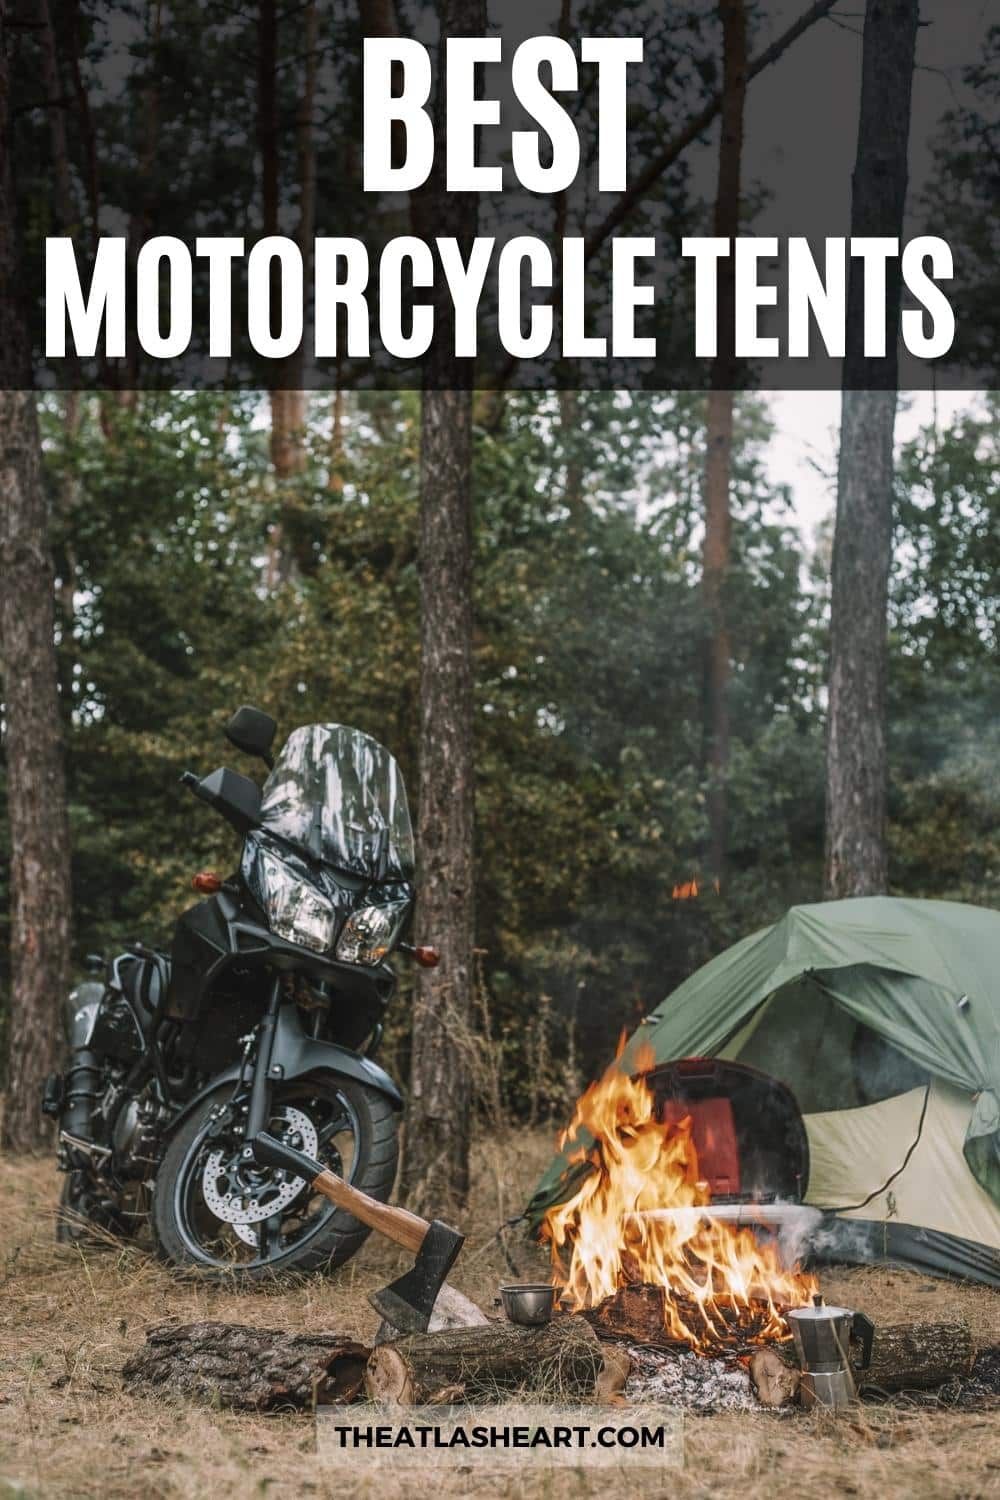 13 Best Motorcycle Tents [Top Tents for Motorcycle Camping]